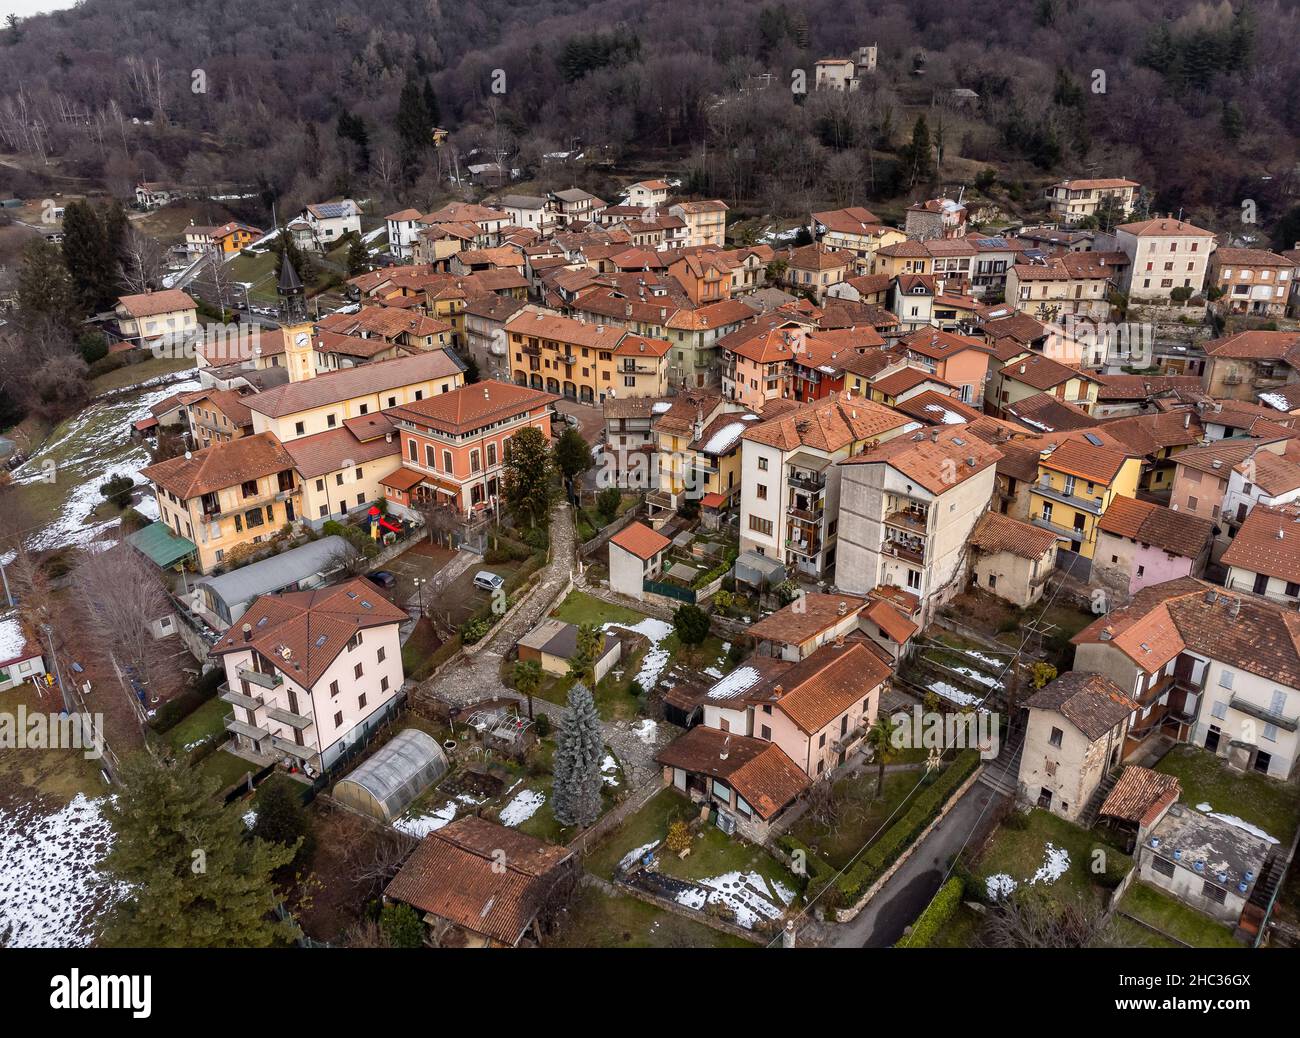 Aerial view of small Italian village Bedero Valcuvia at winter season, situated in province of Varese, Lombardy, Italy Stock Photo